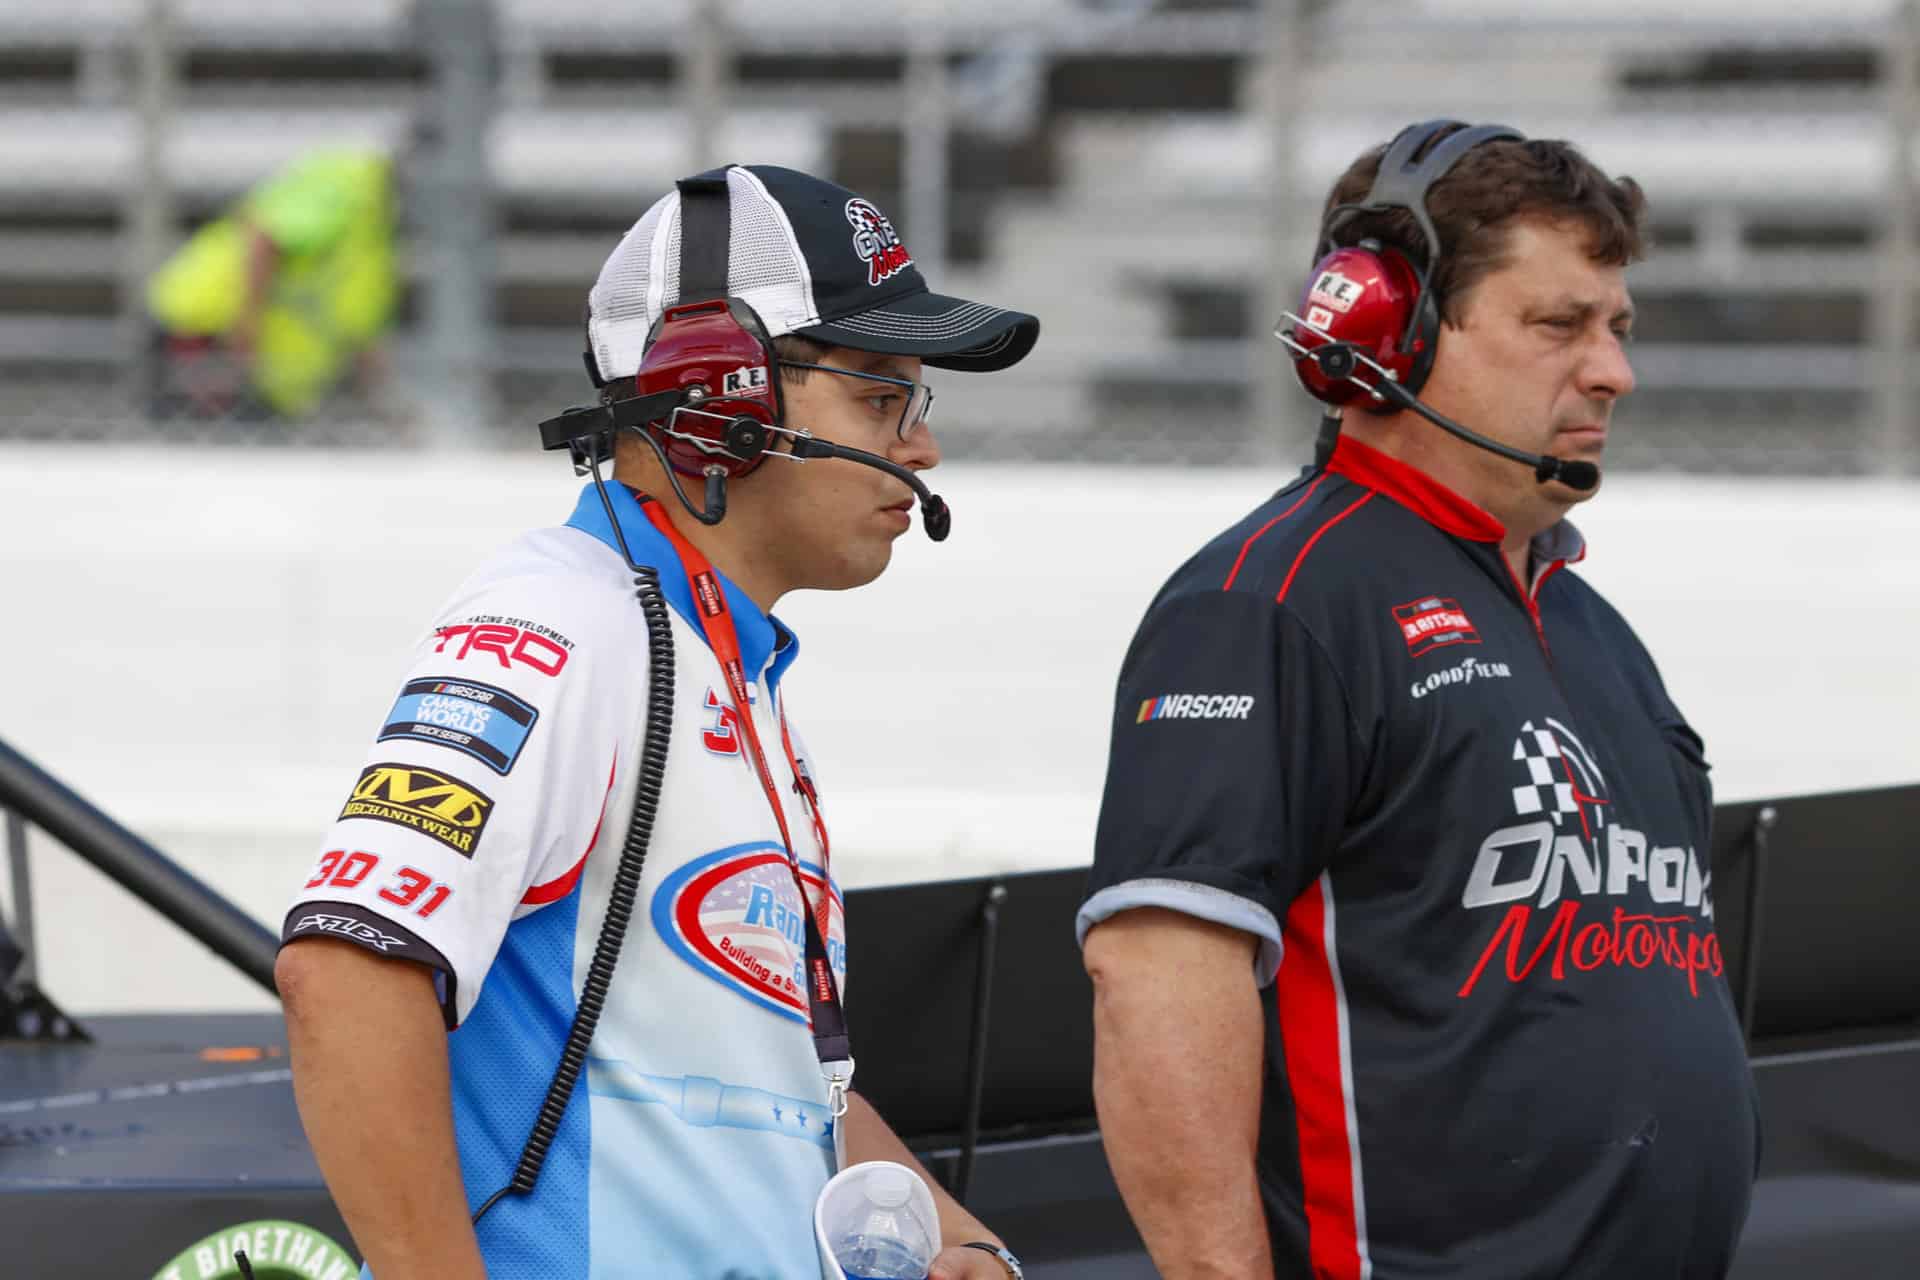 NASCAR driver Ryan Vargas was humbled and surprised by the news that he was nominated for the National Motorsports Press Association's (NMPA) First Quarter Pocono Spirit Award.